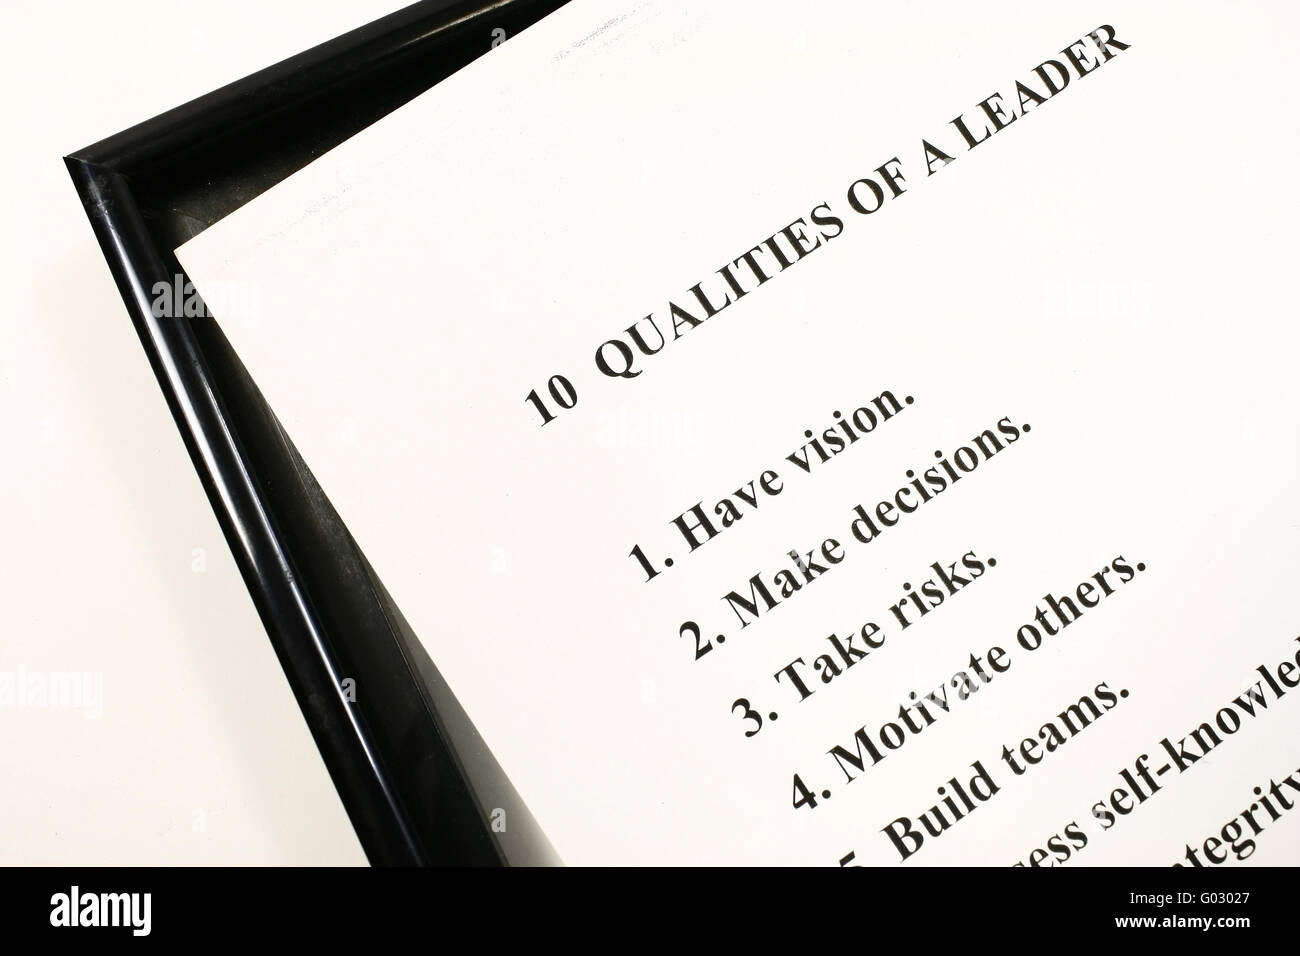 Qualities of a Leader Stock Photo